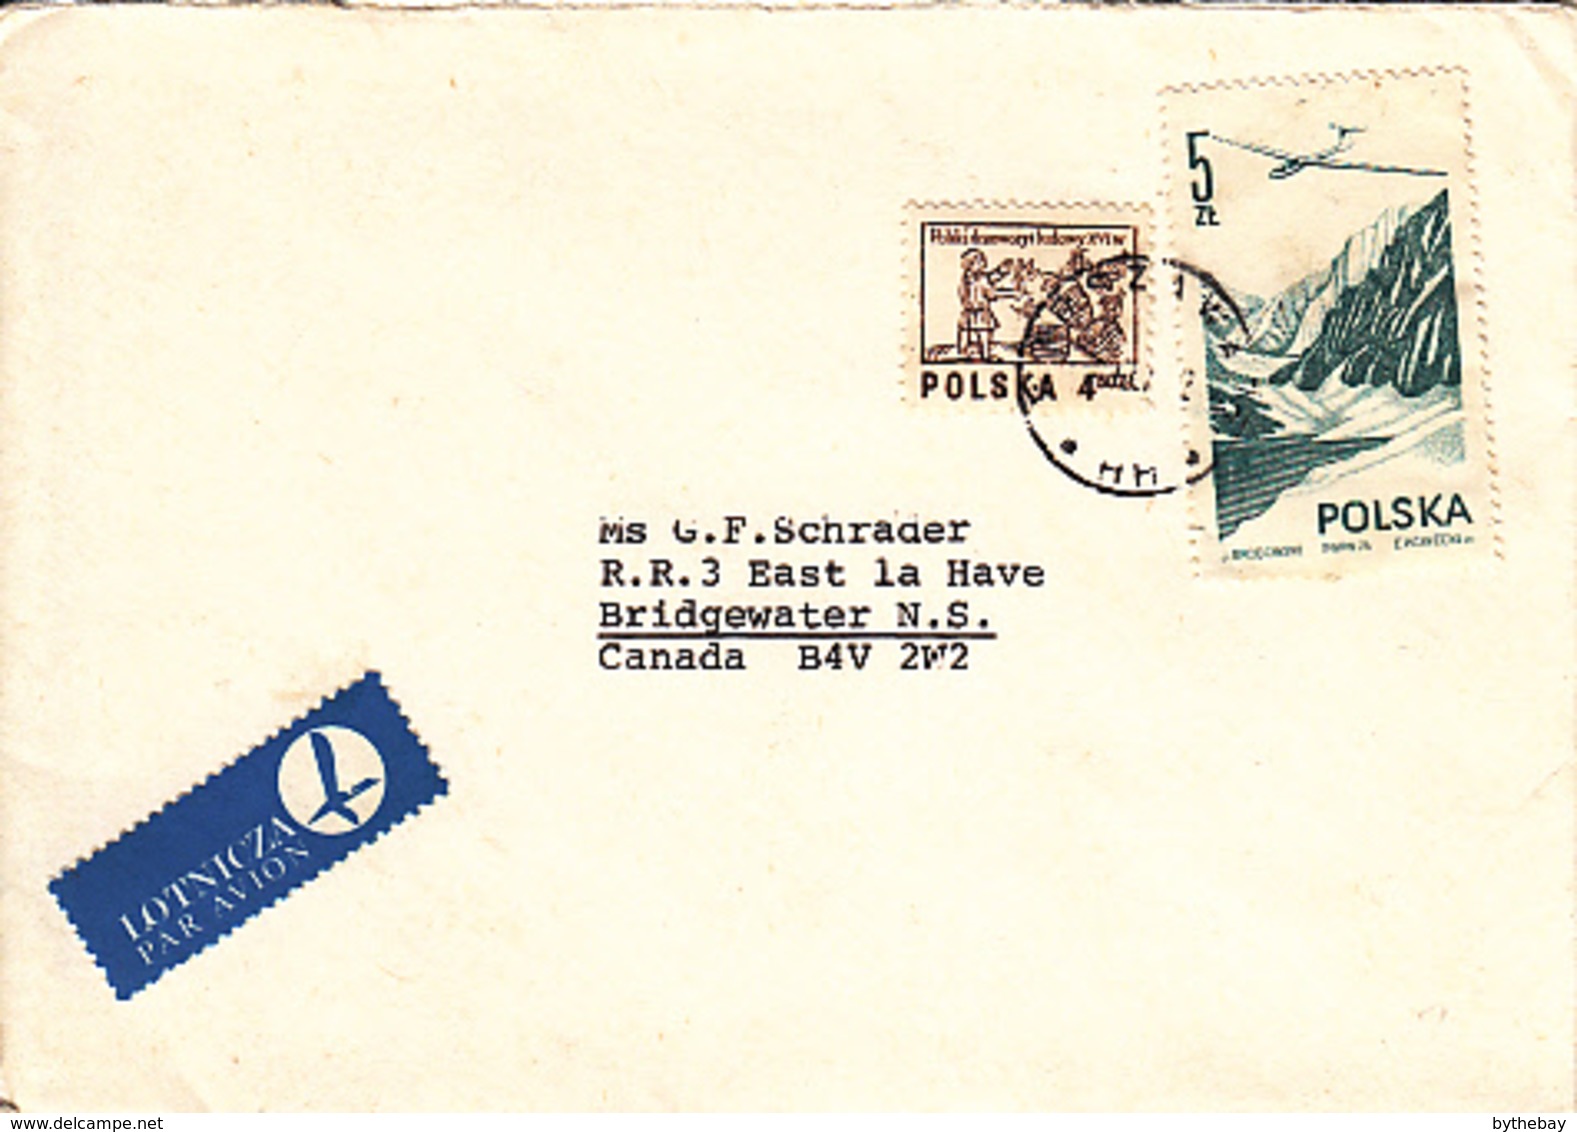 Poland to Canada 13 Airmail Covers mainly 1970s